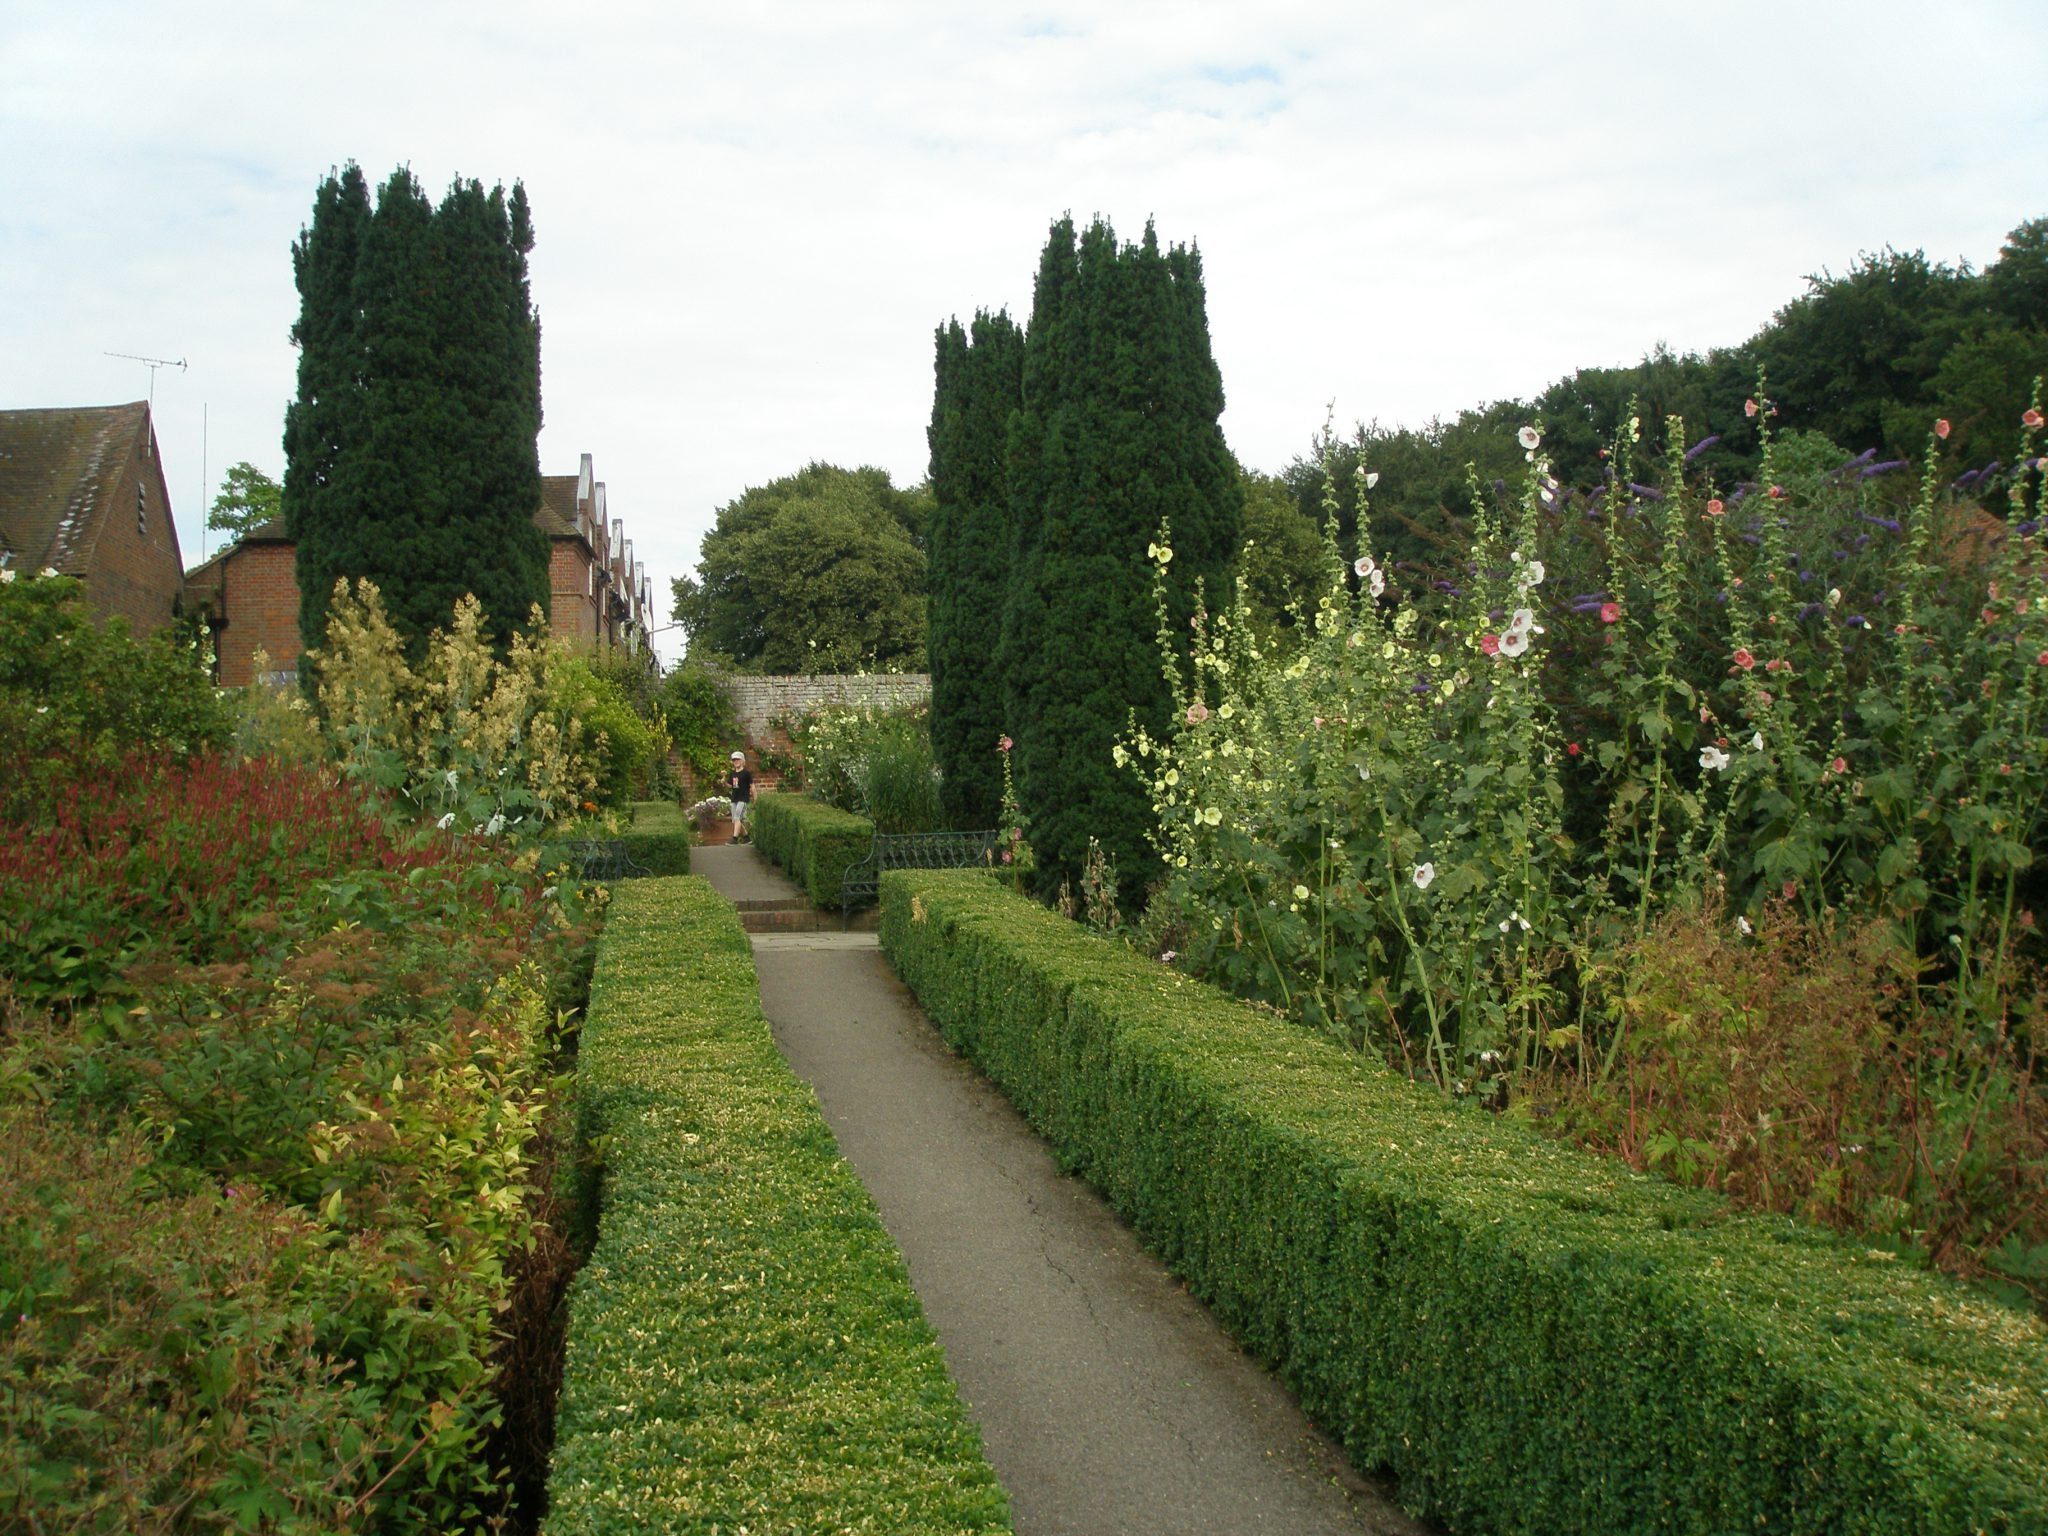 We entered the Culpeper Garden, which occupies the site that was long used for the Castle's kitchen garden. The Culpeper Garden is the creation of designer Russell Page (born 1906, died 1985), and takes its name from the family which owned the Castle in the 17th century.